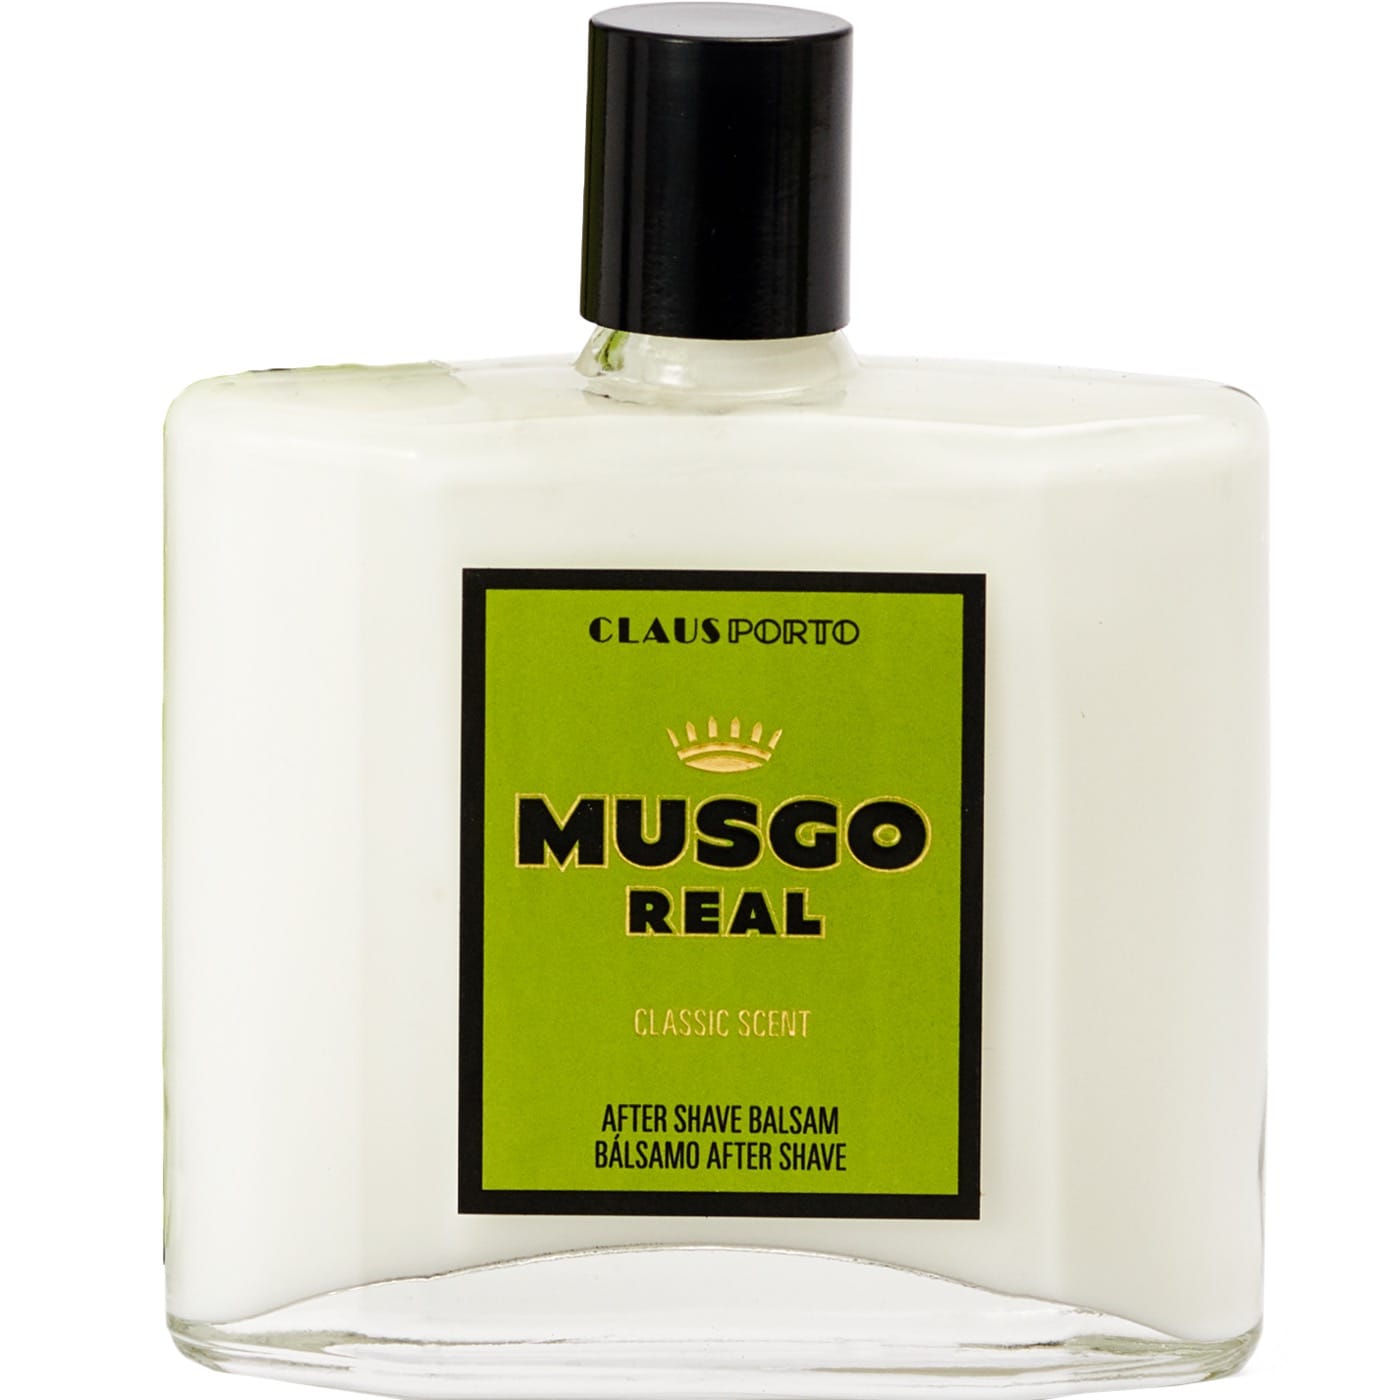 Musgo Real Aftershave Balsem Classic Scent 100ml - 1.2 - MR-004